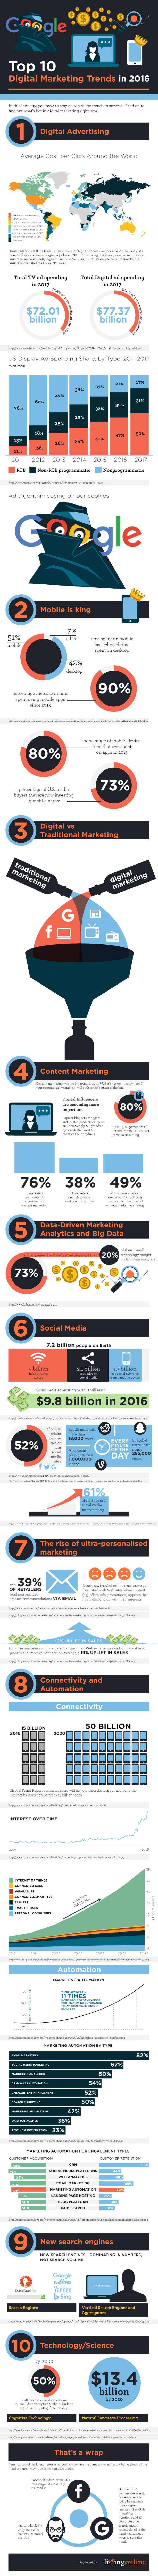 Infographic on Top 10 Digital Marketing Trends in 2016